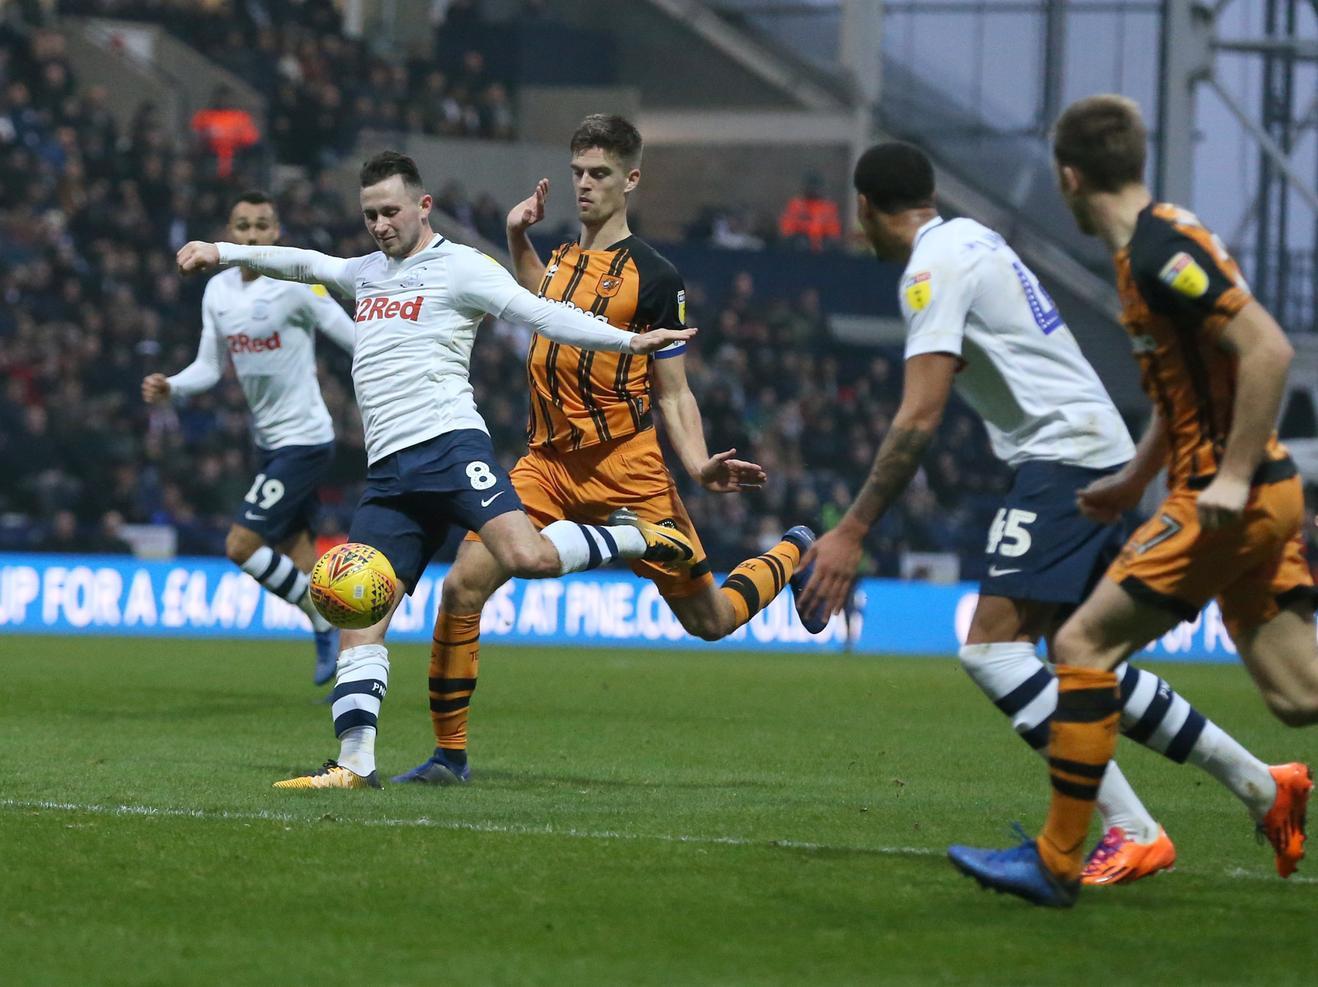 Alan Browne strikes at goal in game which he scored a penalty but was unable to prevent Jackson Irvine's double from giving the Tigers all three points.